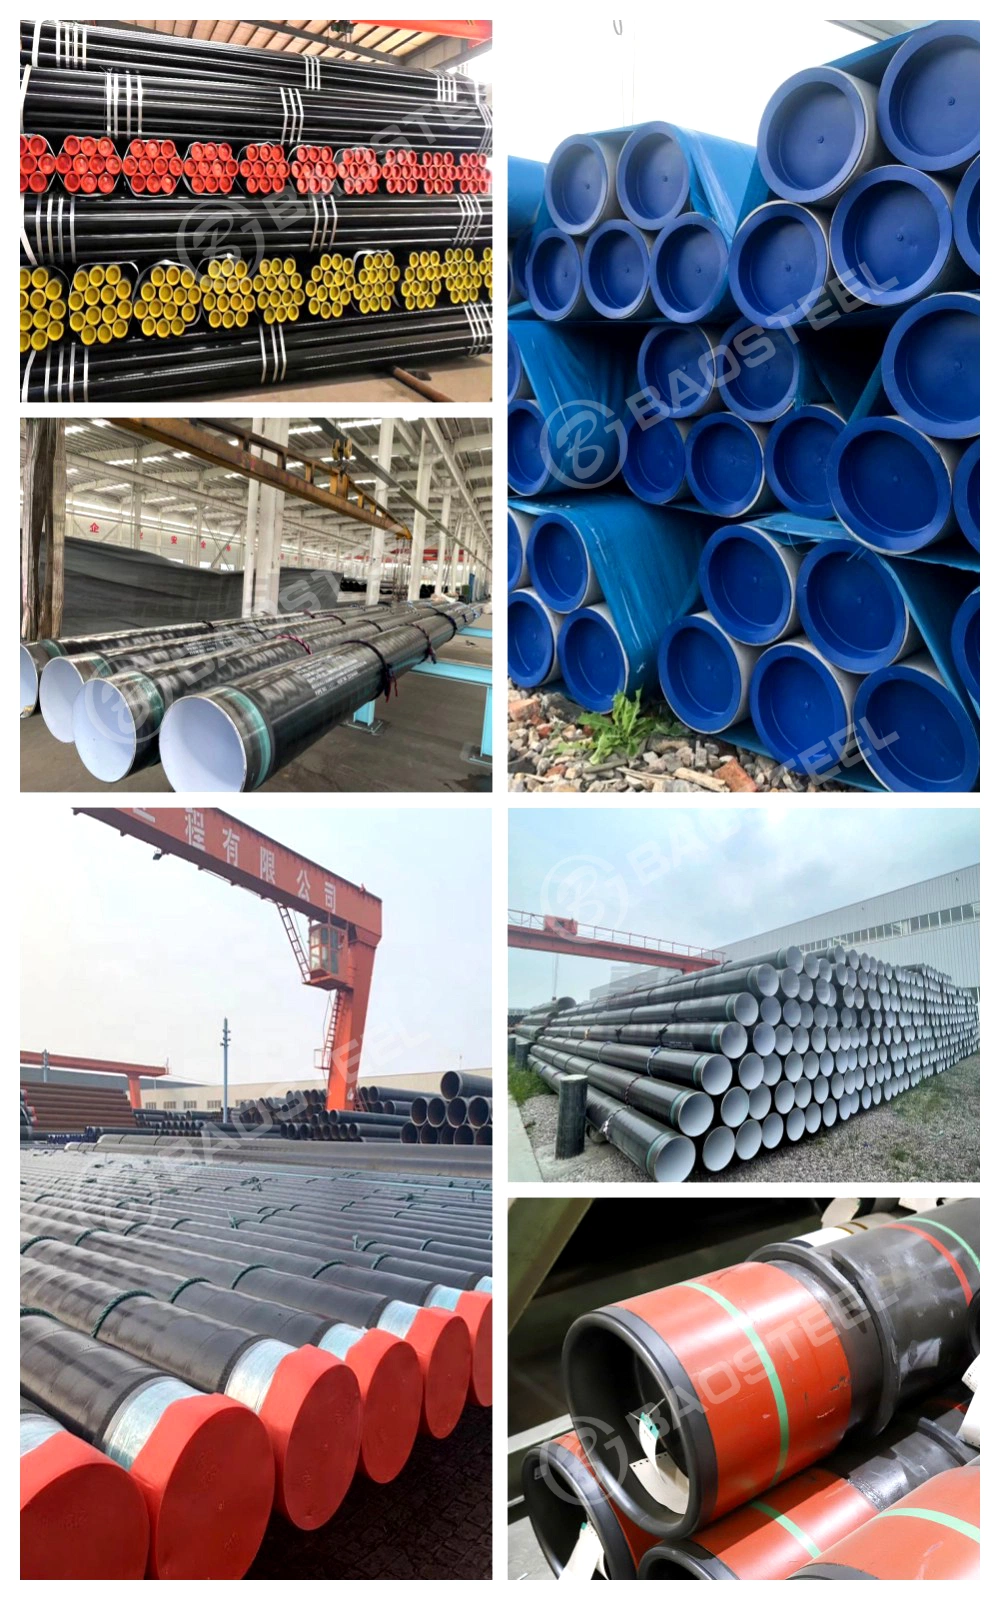 Hot Sale 28mm S235 S355 St52 Seamless Carbon Steel Tube Hot Rolled Hollow Section Galvanized Carbon Steel Round Tube